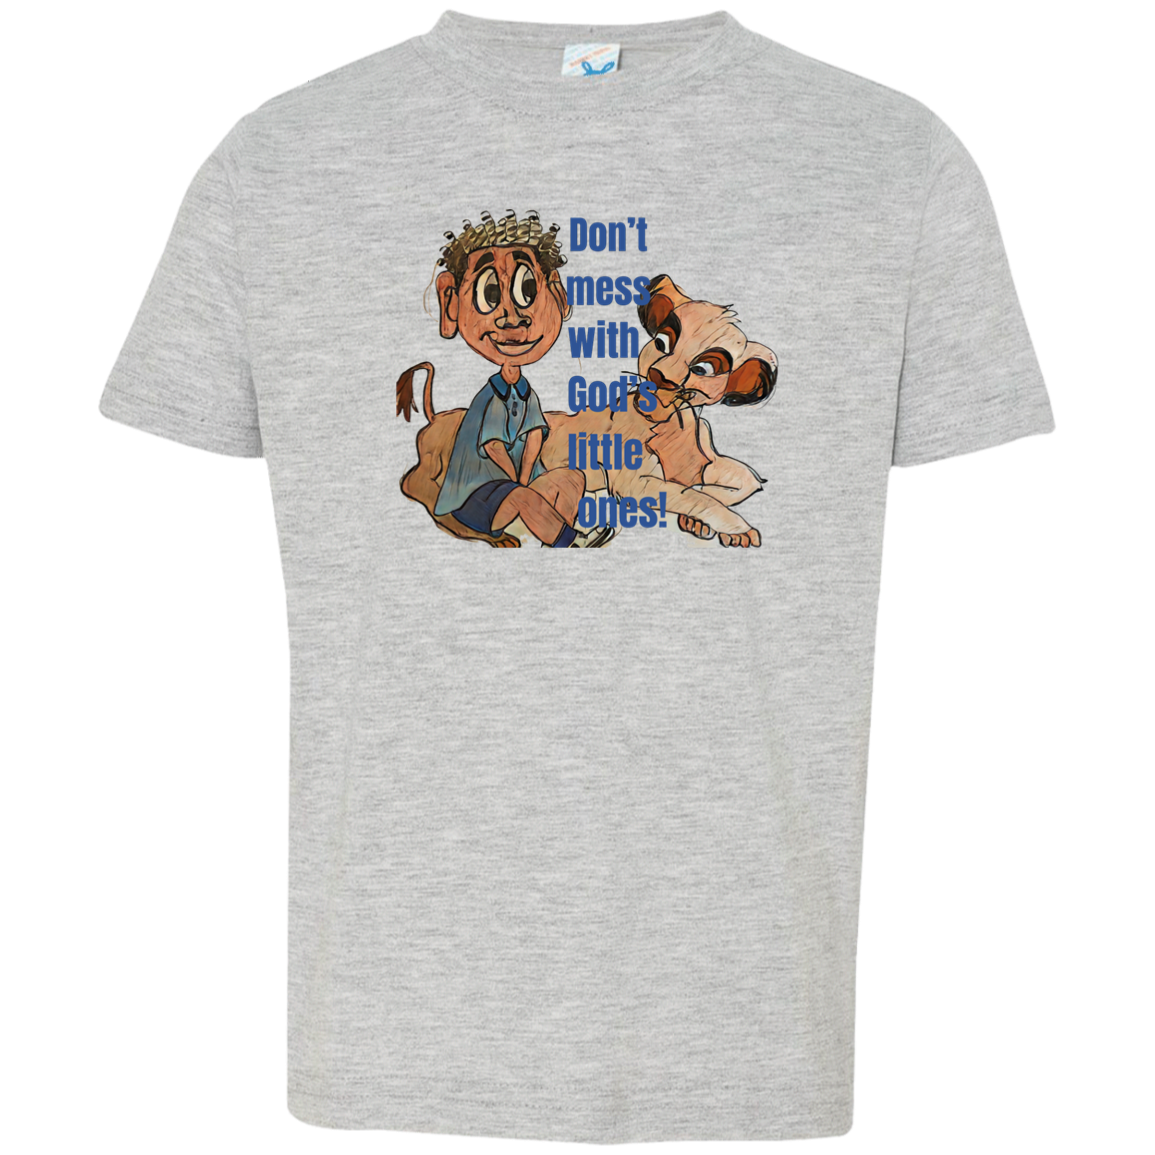 Don't mess with God's little ones Toddler Jersey T-Shirt